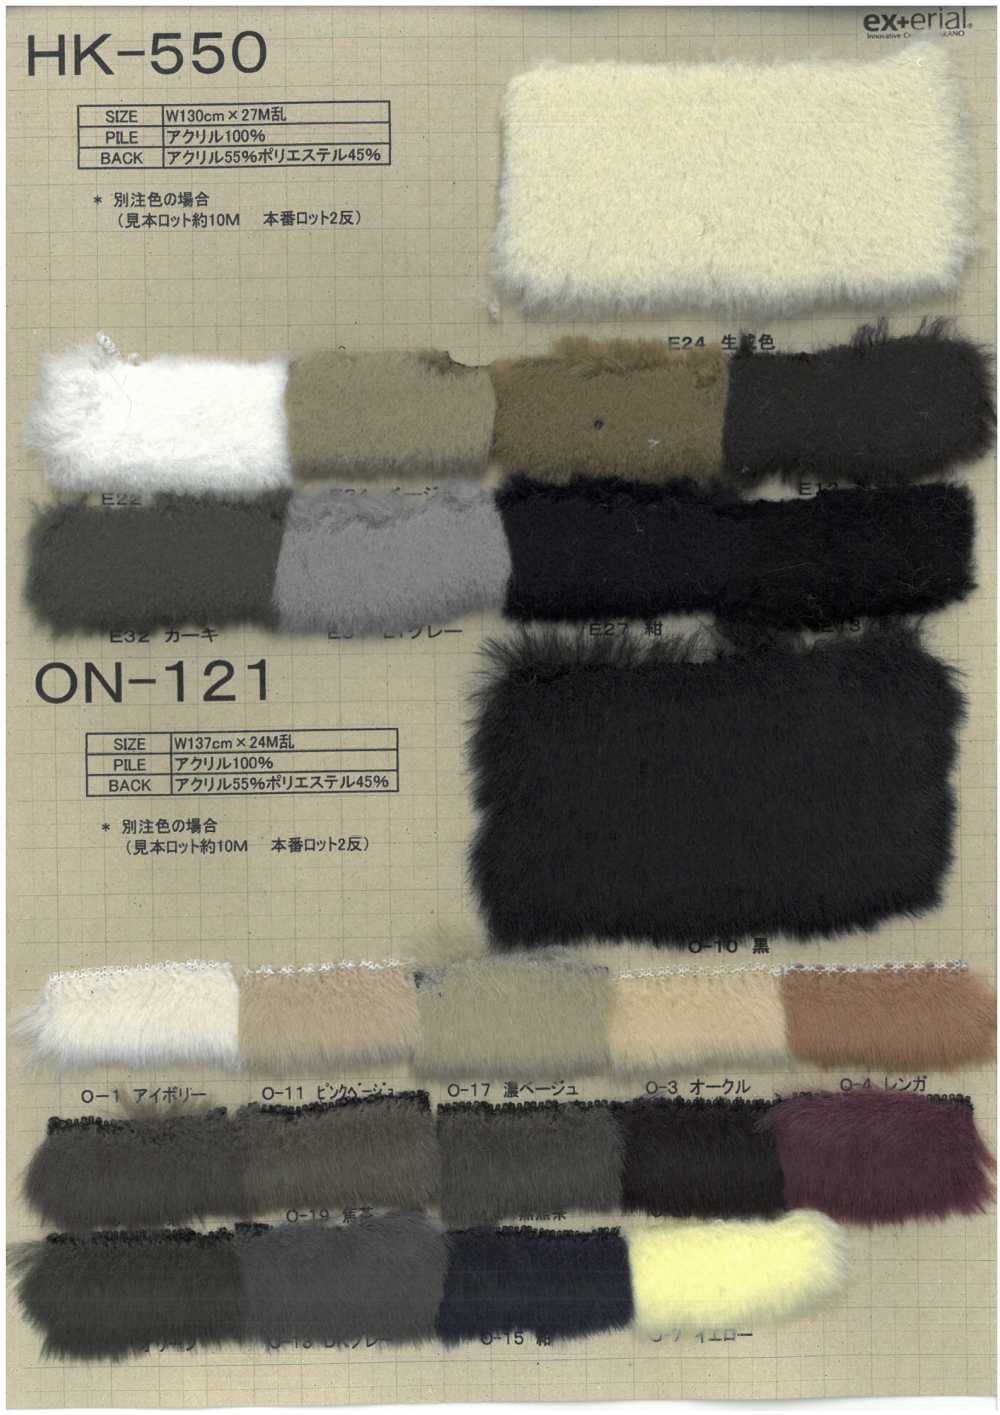 HK-550 Craft Fur [Mouton][Textile / Fabric] Nakano Stockinette Industry